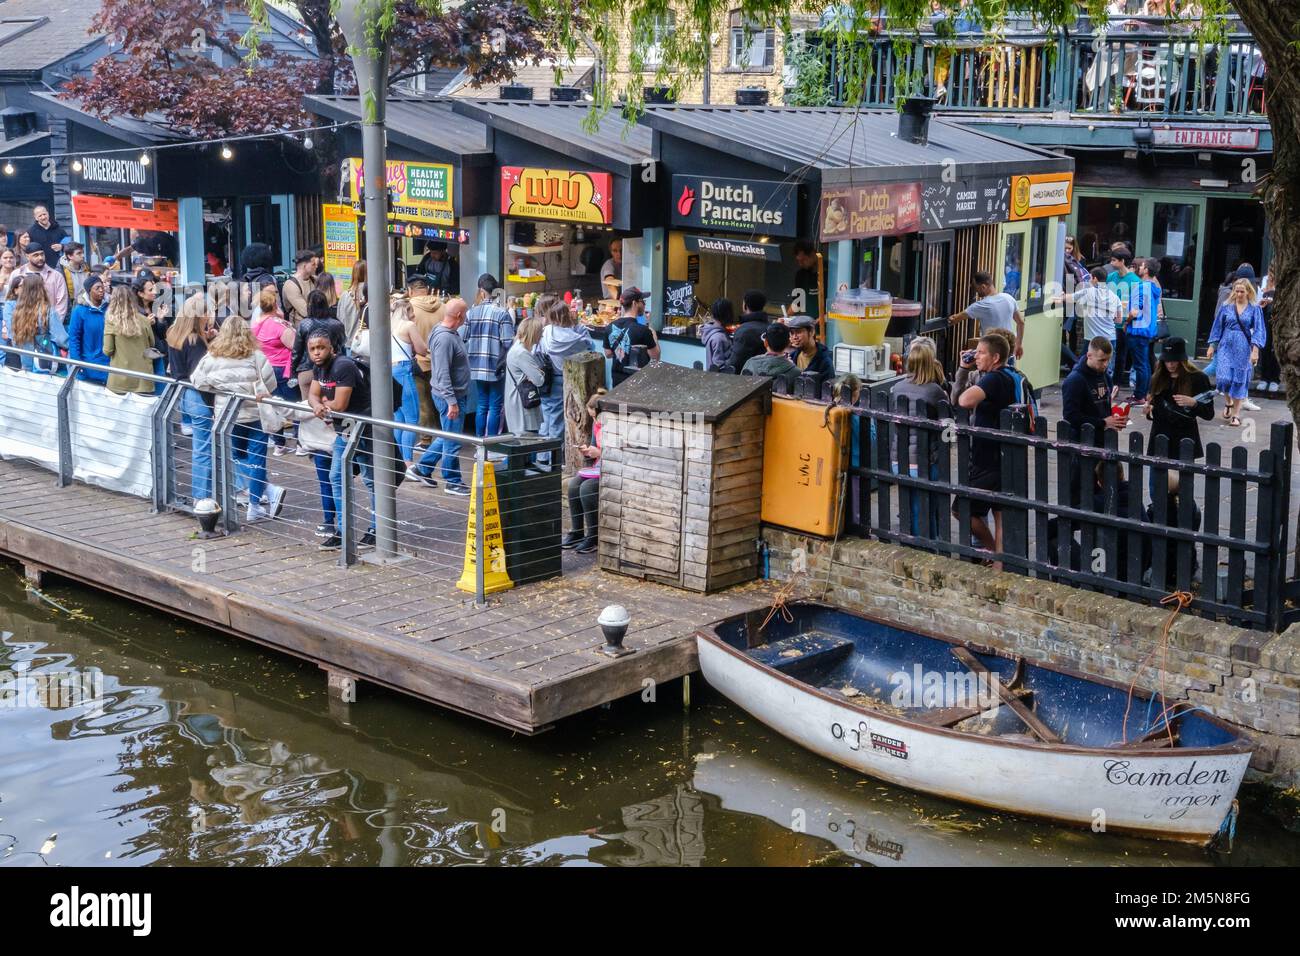 Crowds of people and diverse international fast food stalls at Camden Market, next to Regent’s Canal, Central London, England. Stock Photo